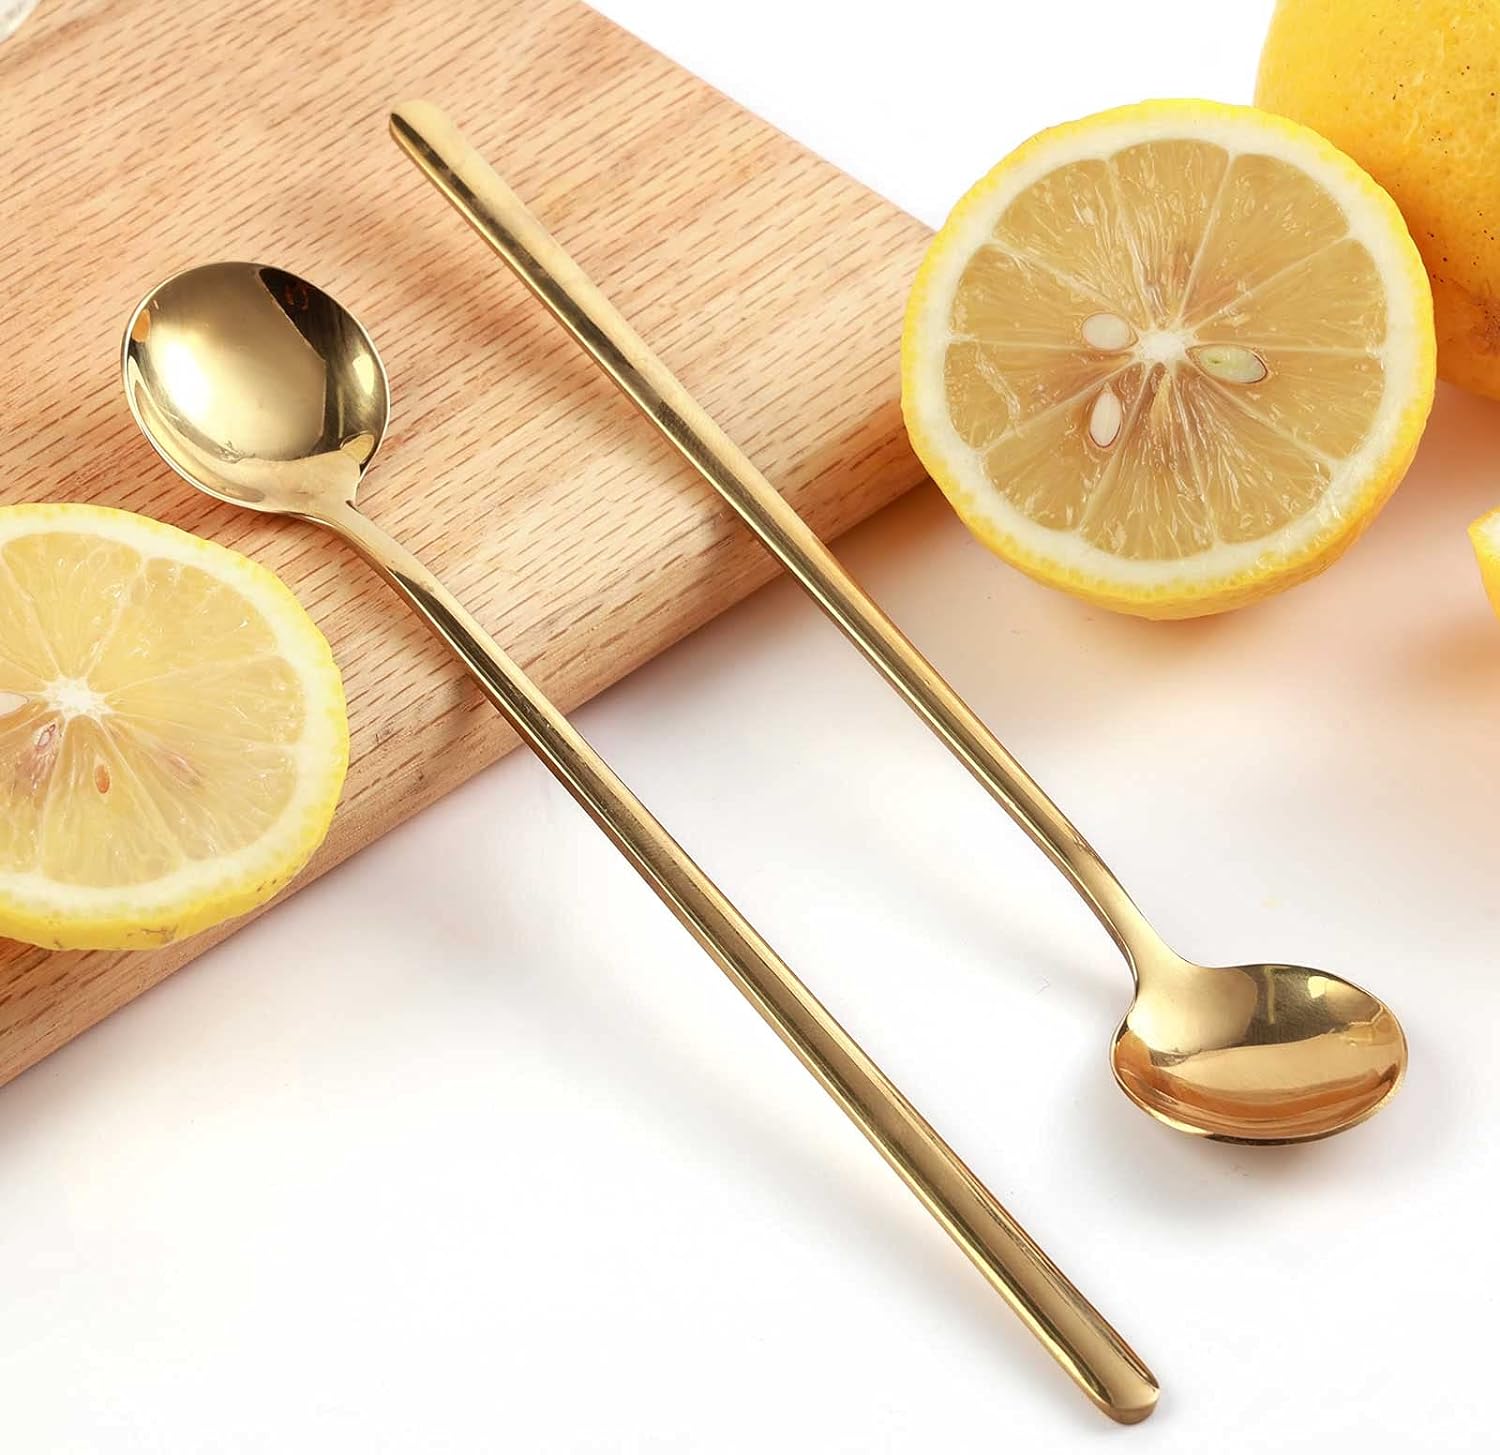 4 PCS 6.7 Inches Coffee Spoons, Stirring Spoons, Tea Spoons Long Handle, Gold Teaspoons, Gold Spoons, Ice Tea Spoons, Long Spoons for Stirring, Gold Espresso Spoons Stainless Steel